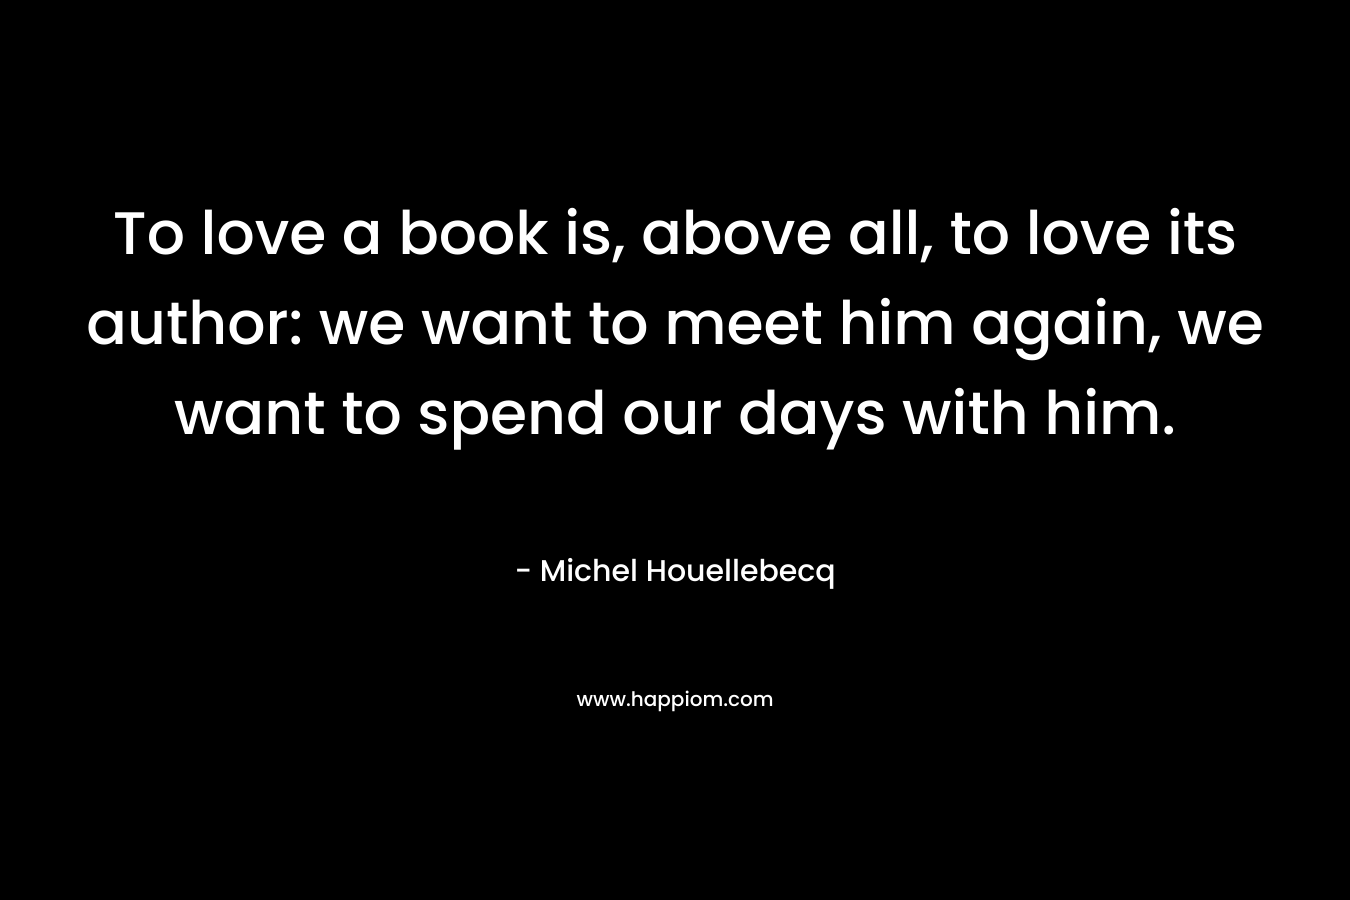 To love a book is, above all, to love its author: we want to meet him again, we want to spend our days with him.